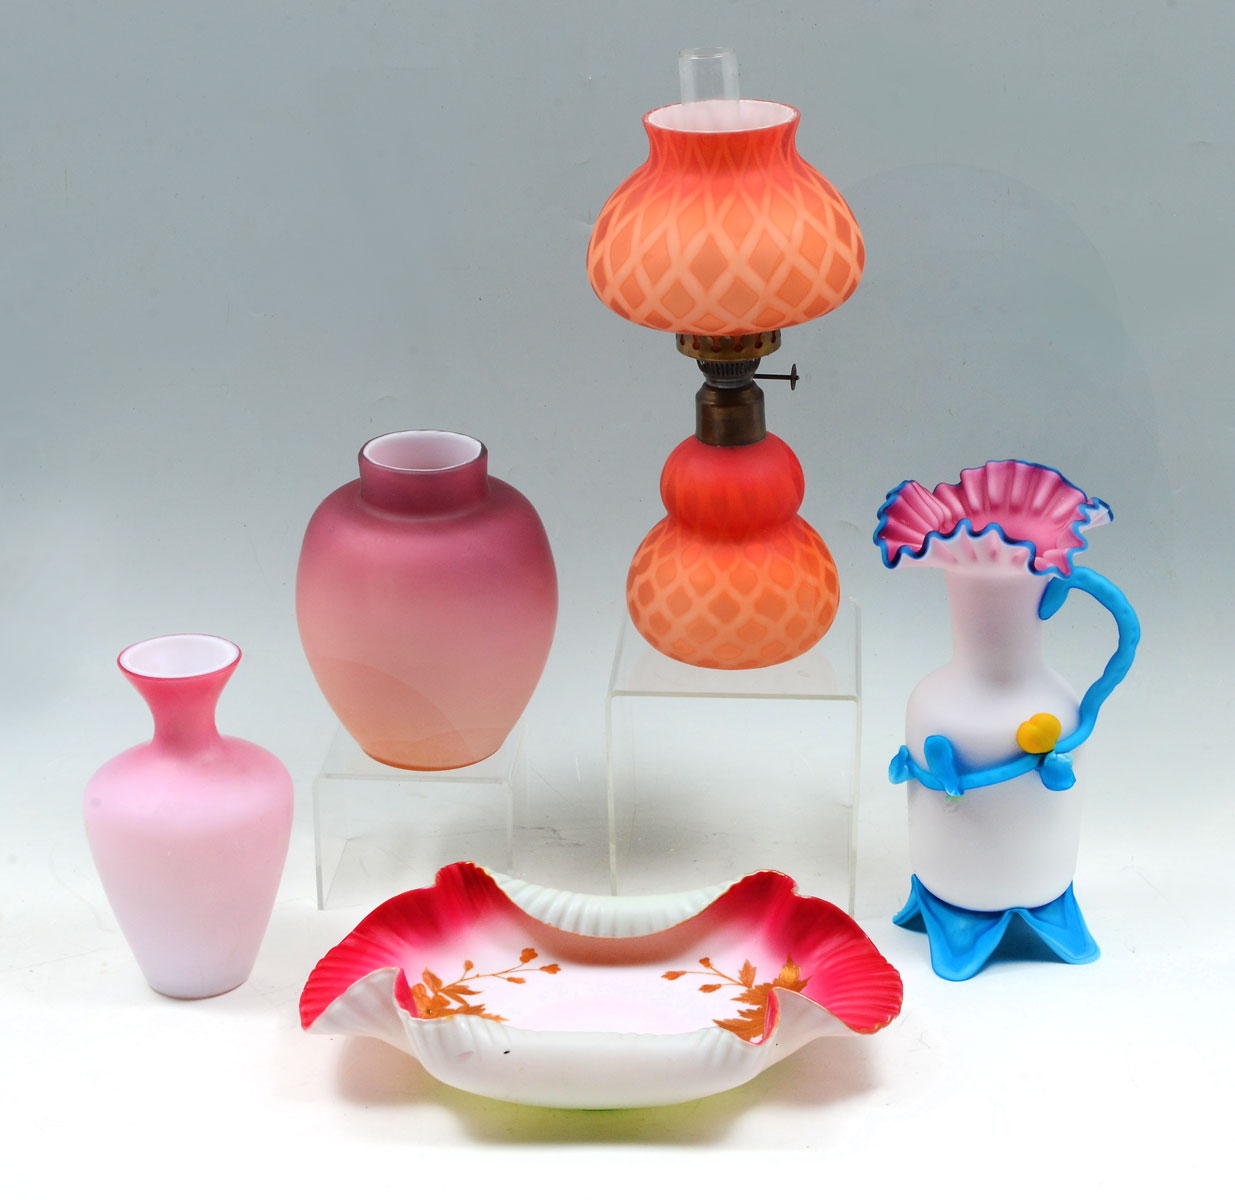 5 PIECE ART GLASS COLLECTION Comprising  36f36d